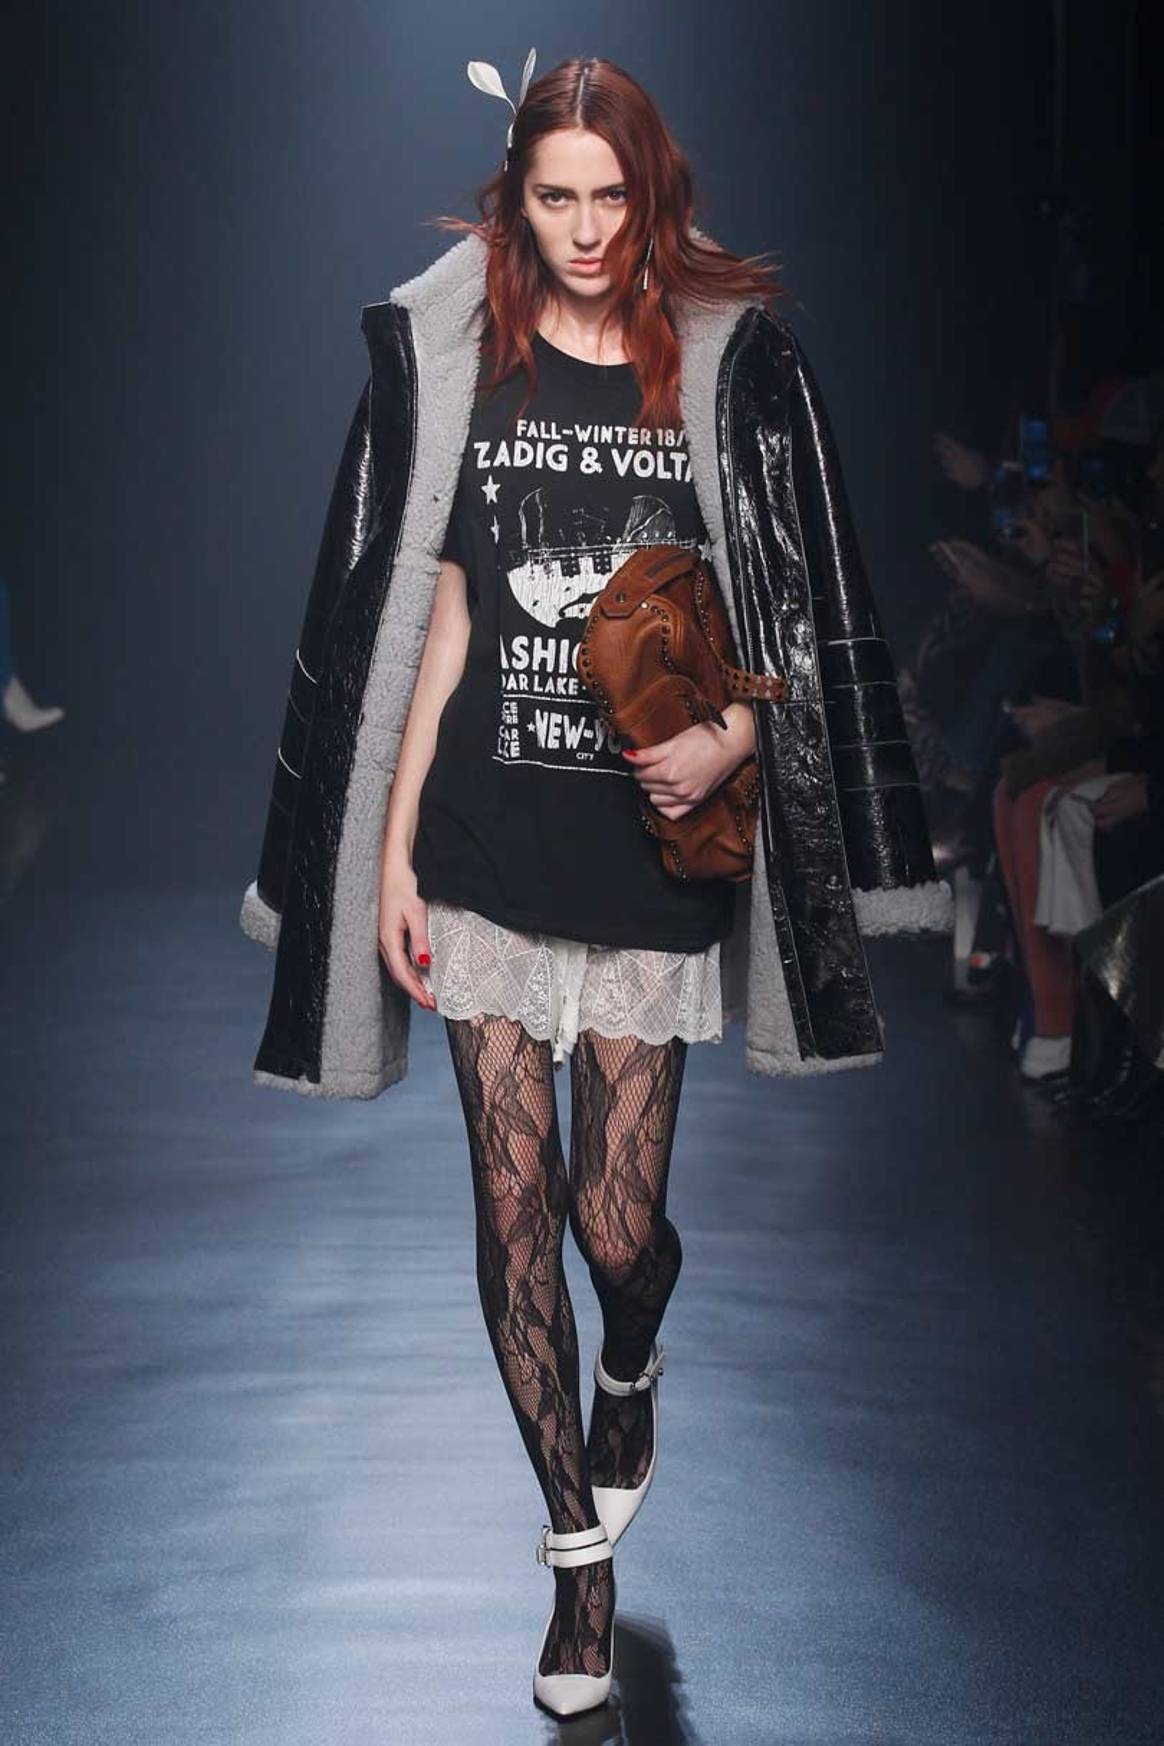 Zadig & Voltaire explores contradictions at New York Fashion Week